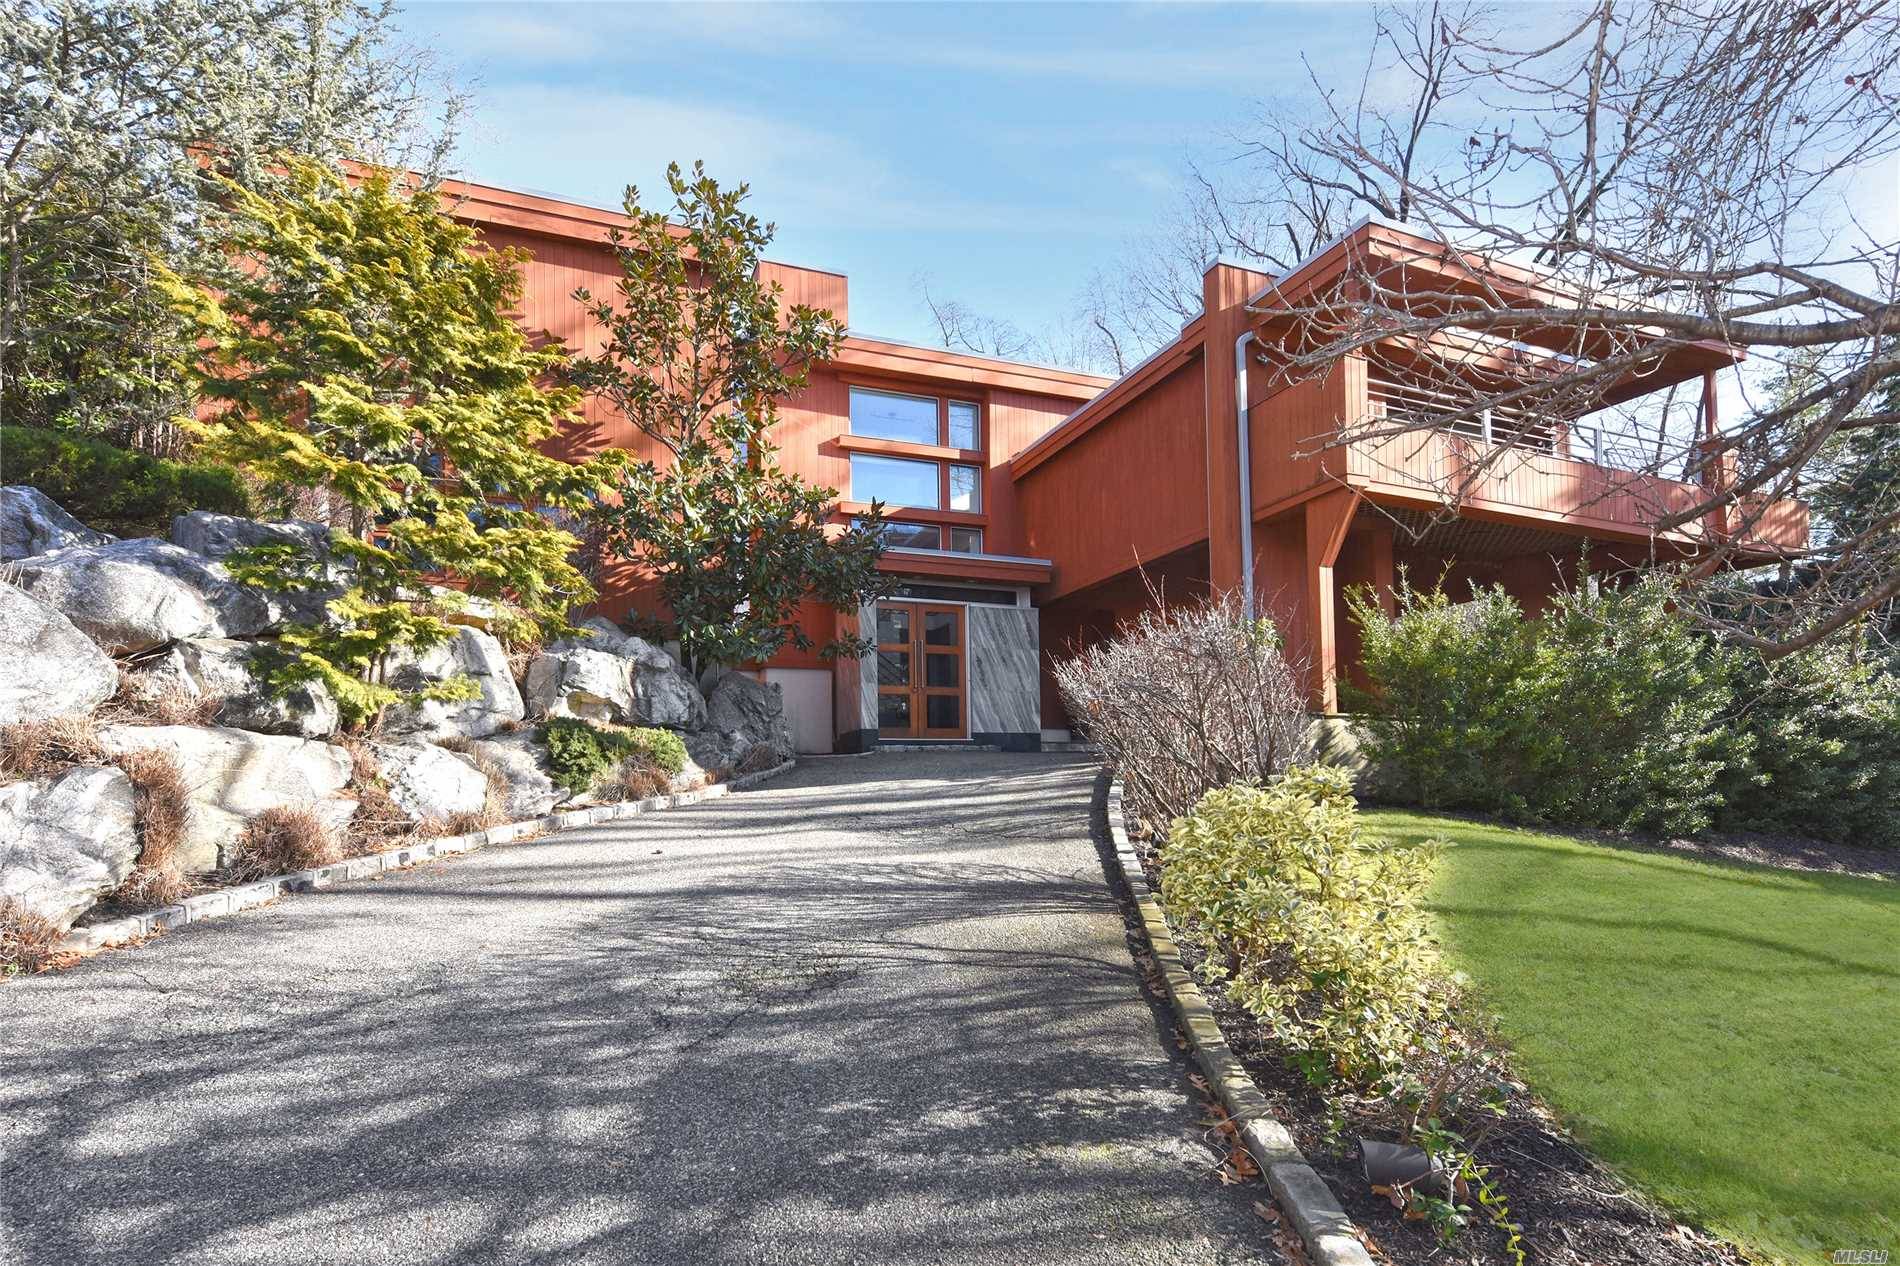 5 Br, 3. 55 Ba, Sun Filled, Mid Century Modern Home, Custom Designed, Built And, Most Recently, Expanded By Its Renowned Engineer Architect Owners.